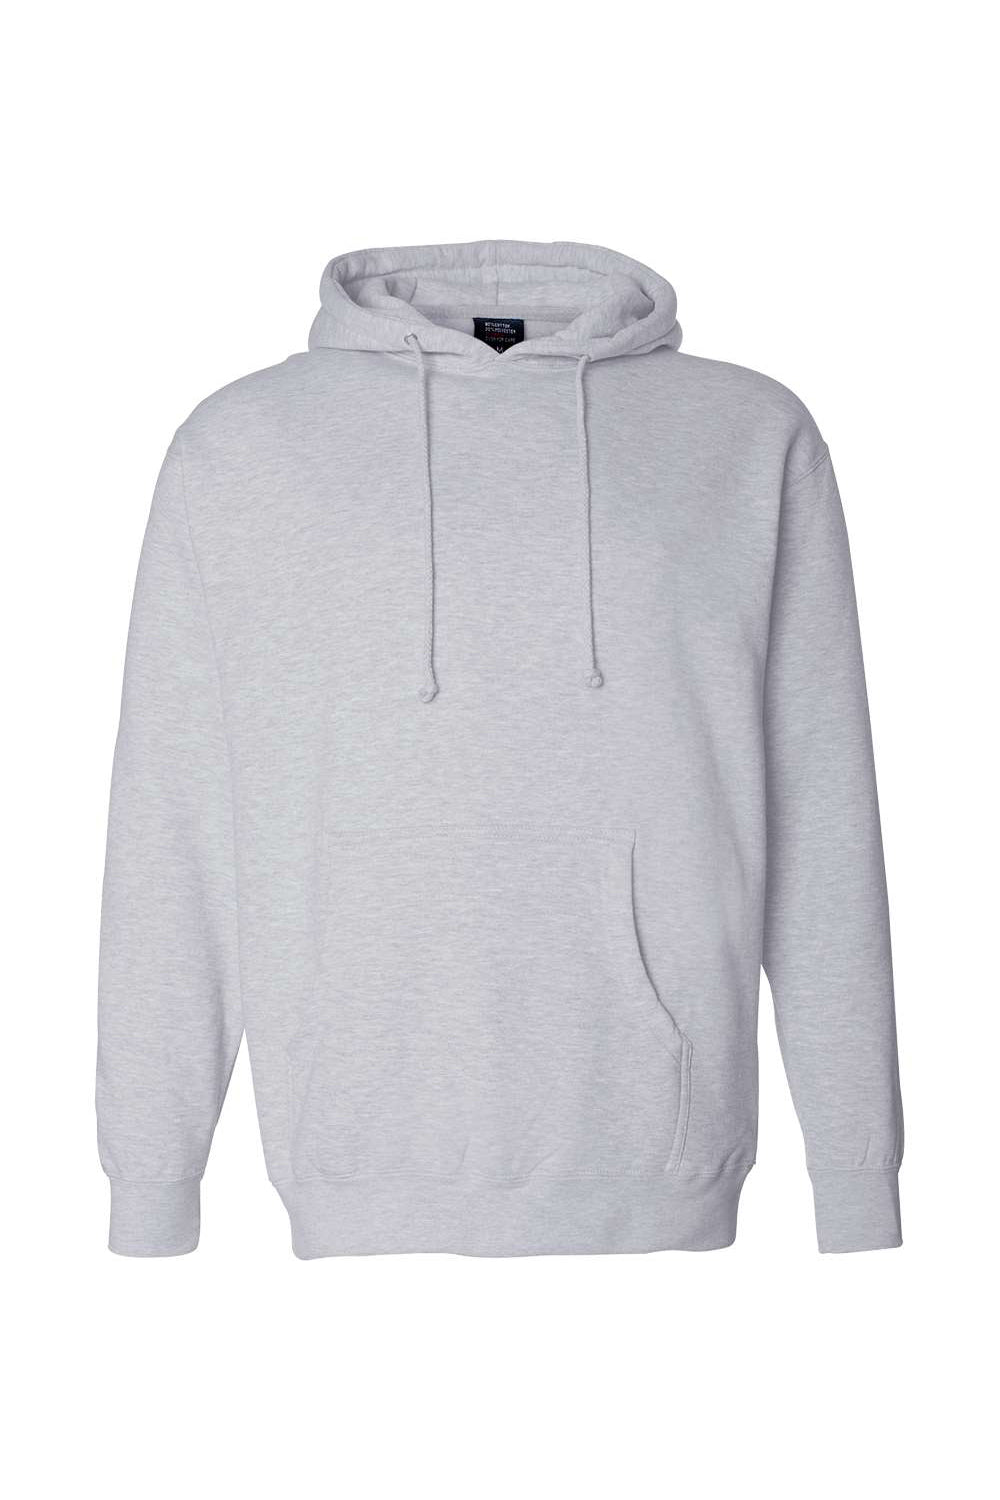 Independent Trading Co. IND4000 Mens Hooded Sweatshirt Hoodie Heather Grey Flat Front